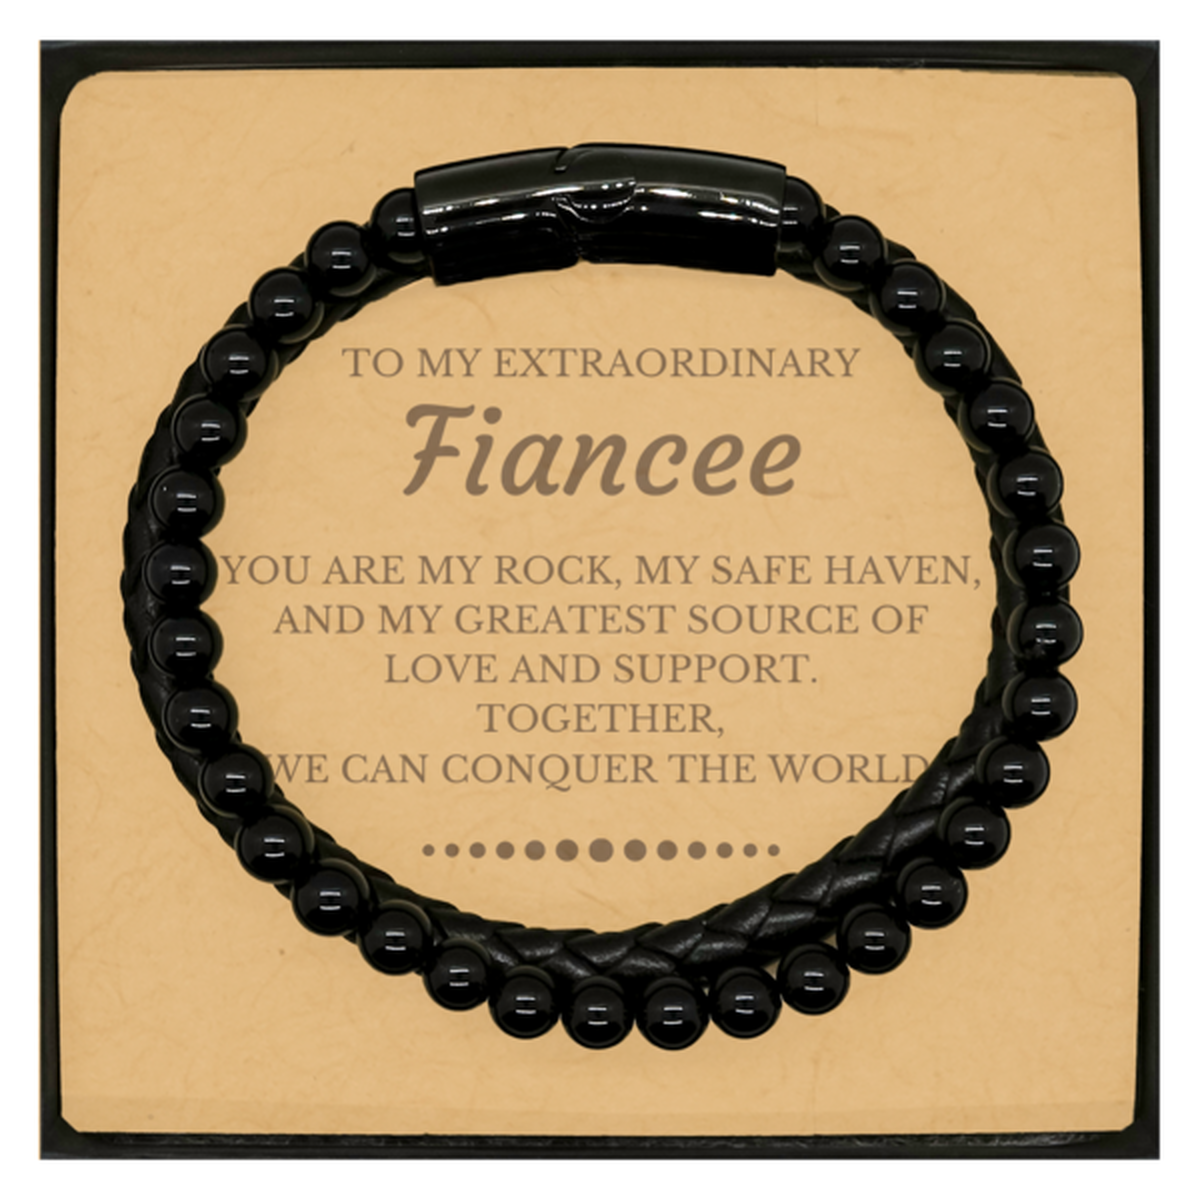 To My Extraordinary Fiancee Gifts, Together, we can conquer the world, Birthday Christmas Stone Leather Bracelets For Fiancee, Christmas Gifts For Fiancee